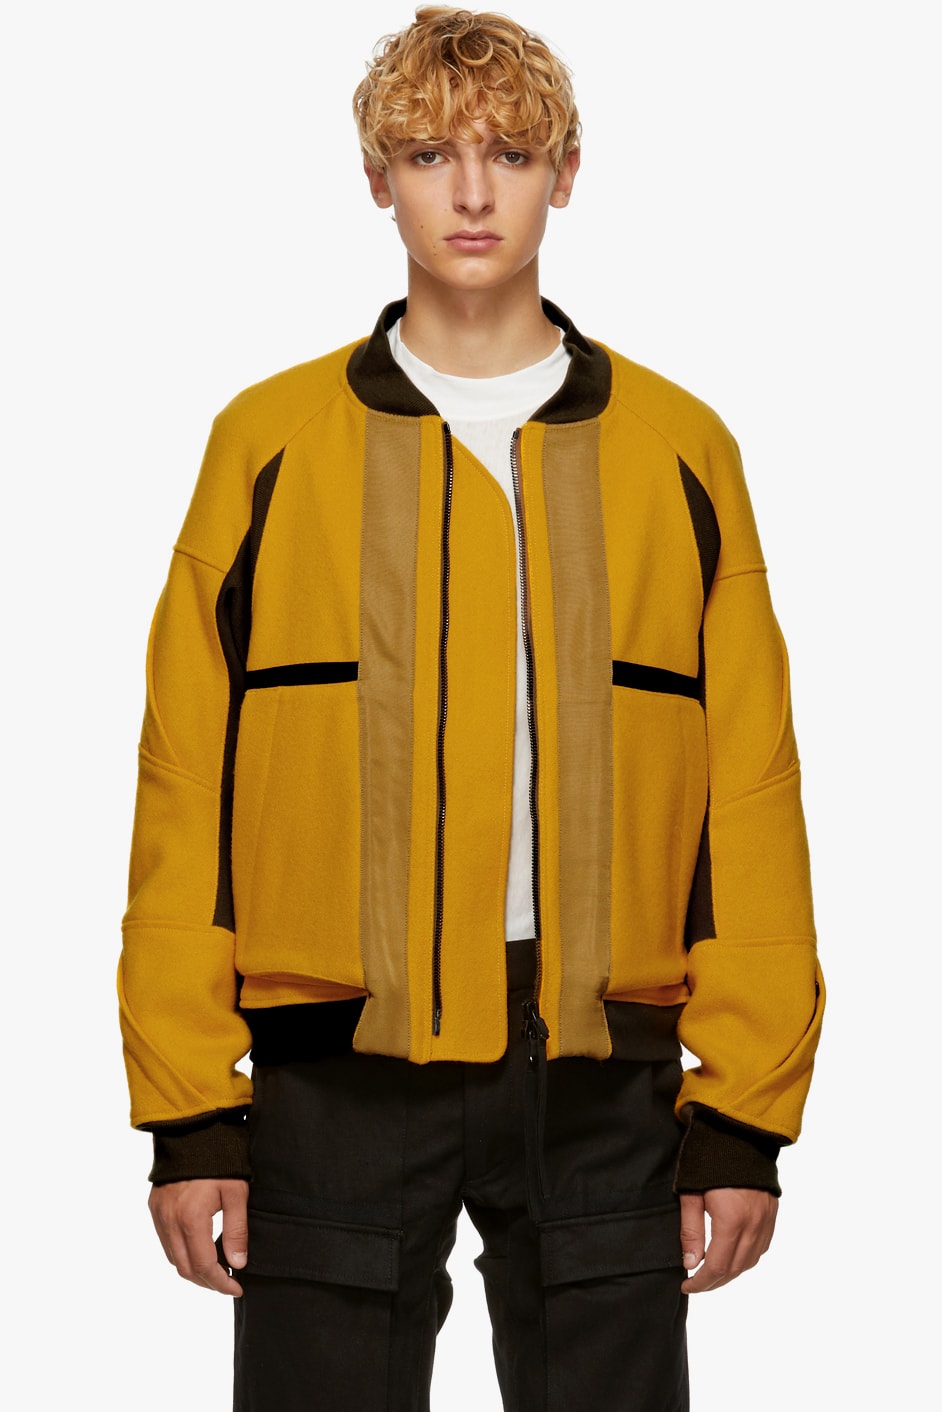 Abasi Rosborough fall winter 2018 ssense exclusive limited 10 pieces flight jacket yellow wool technical new york america outerwear